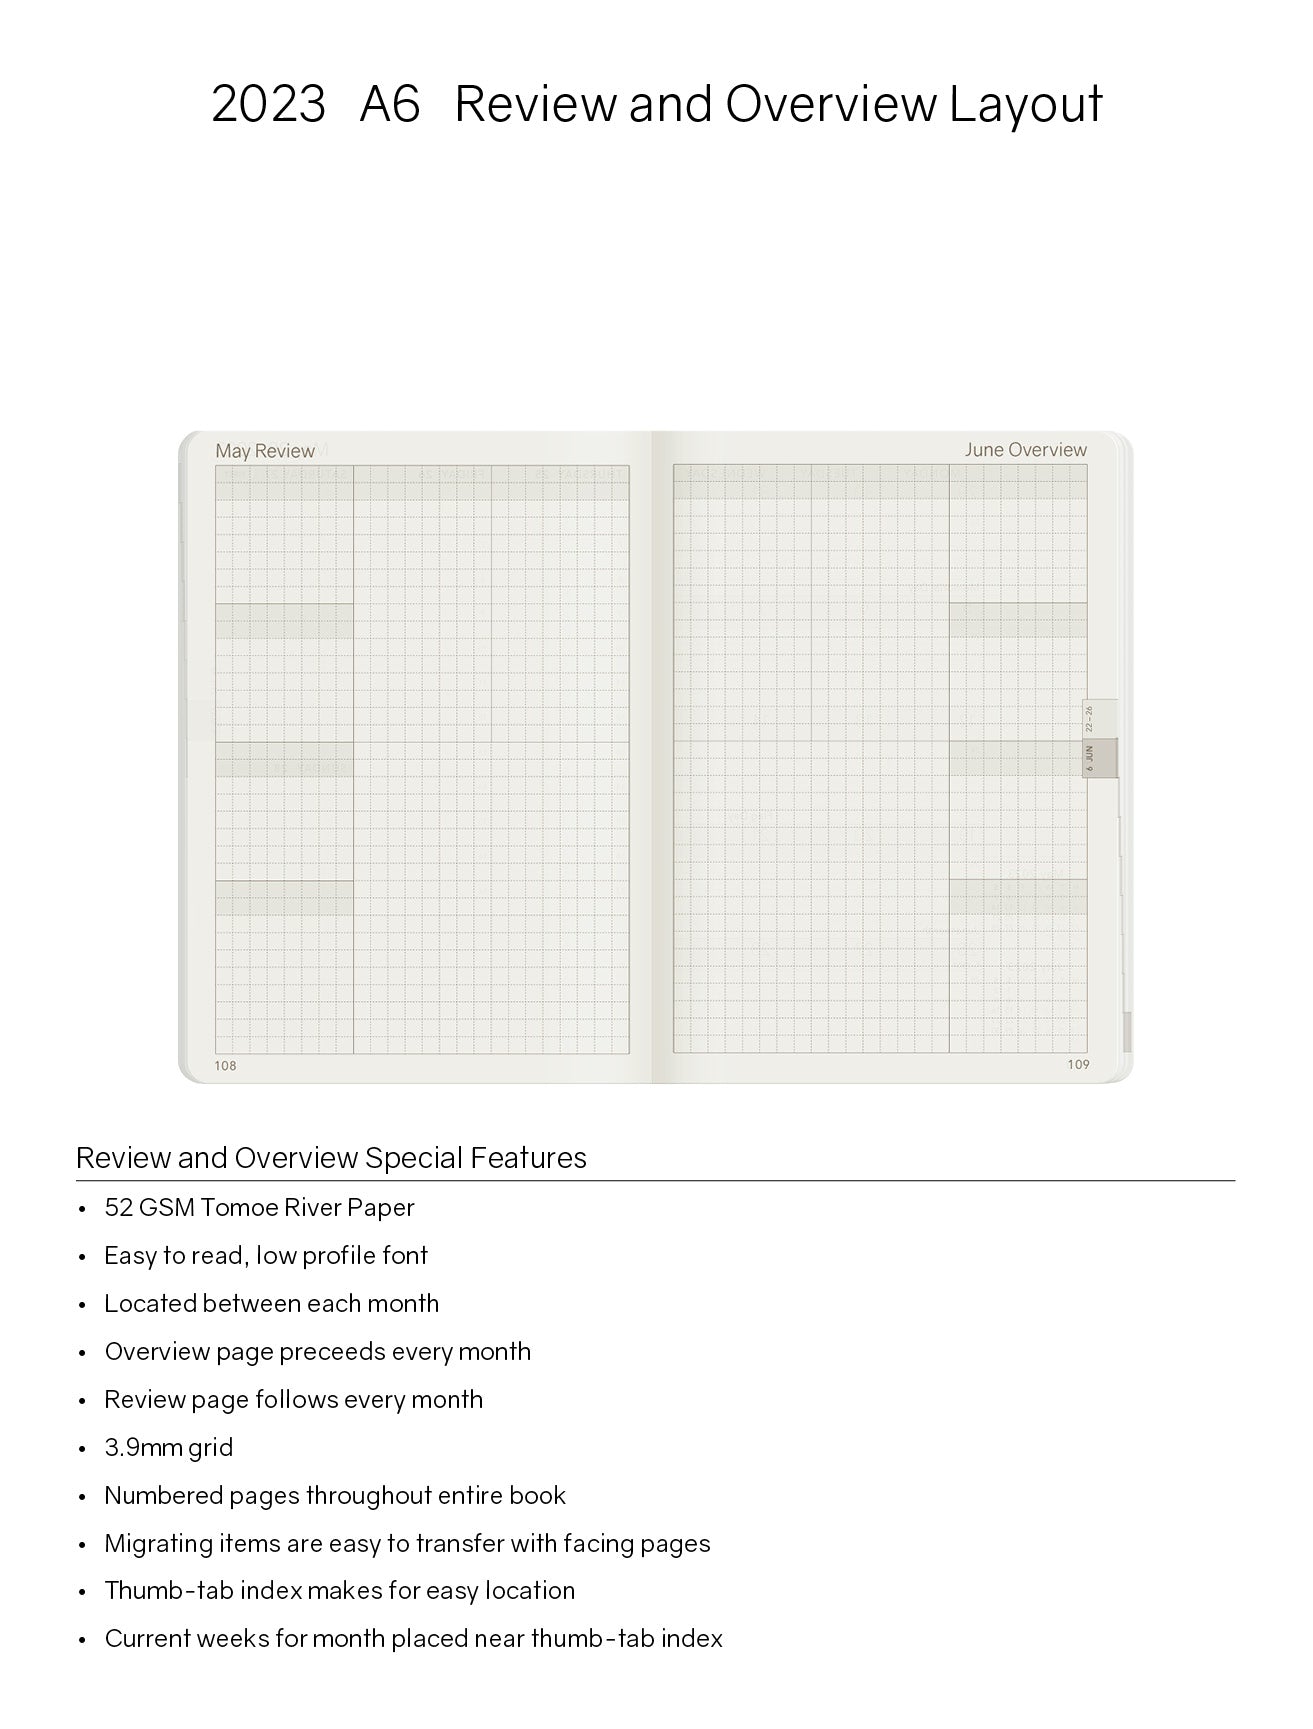 2023 A6 Weekly Planner - 52gsm Tomoe River Paper